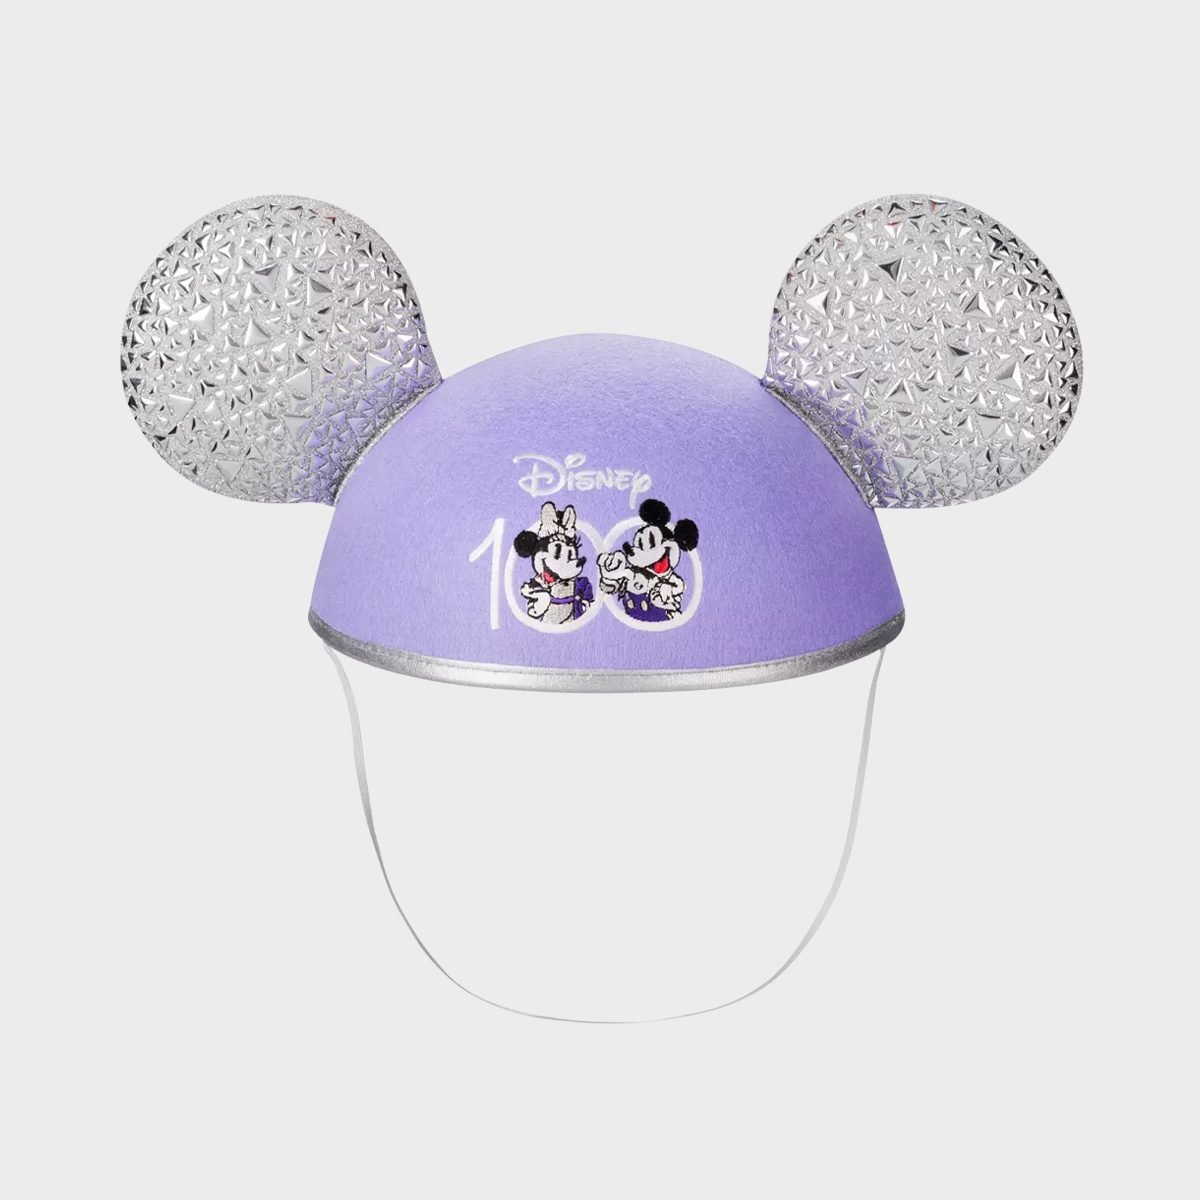 The Best Disney Gifts for Kids (and a Few for Adults, Too)